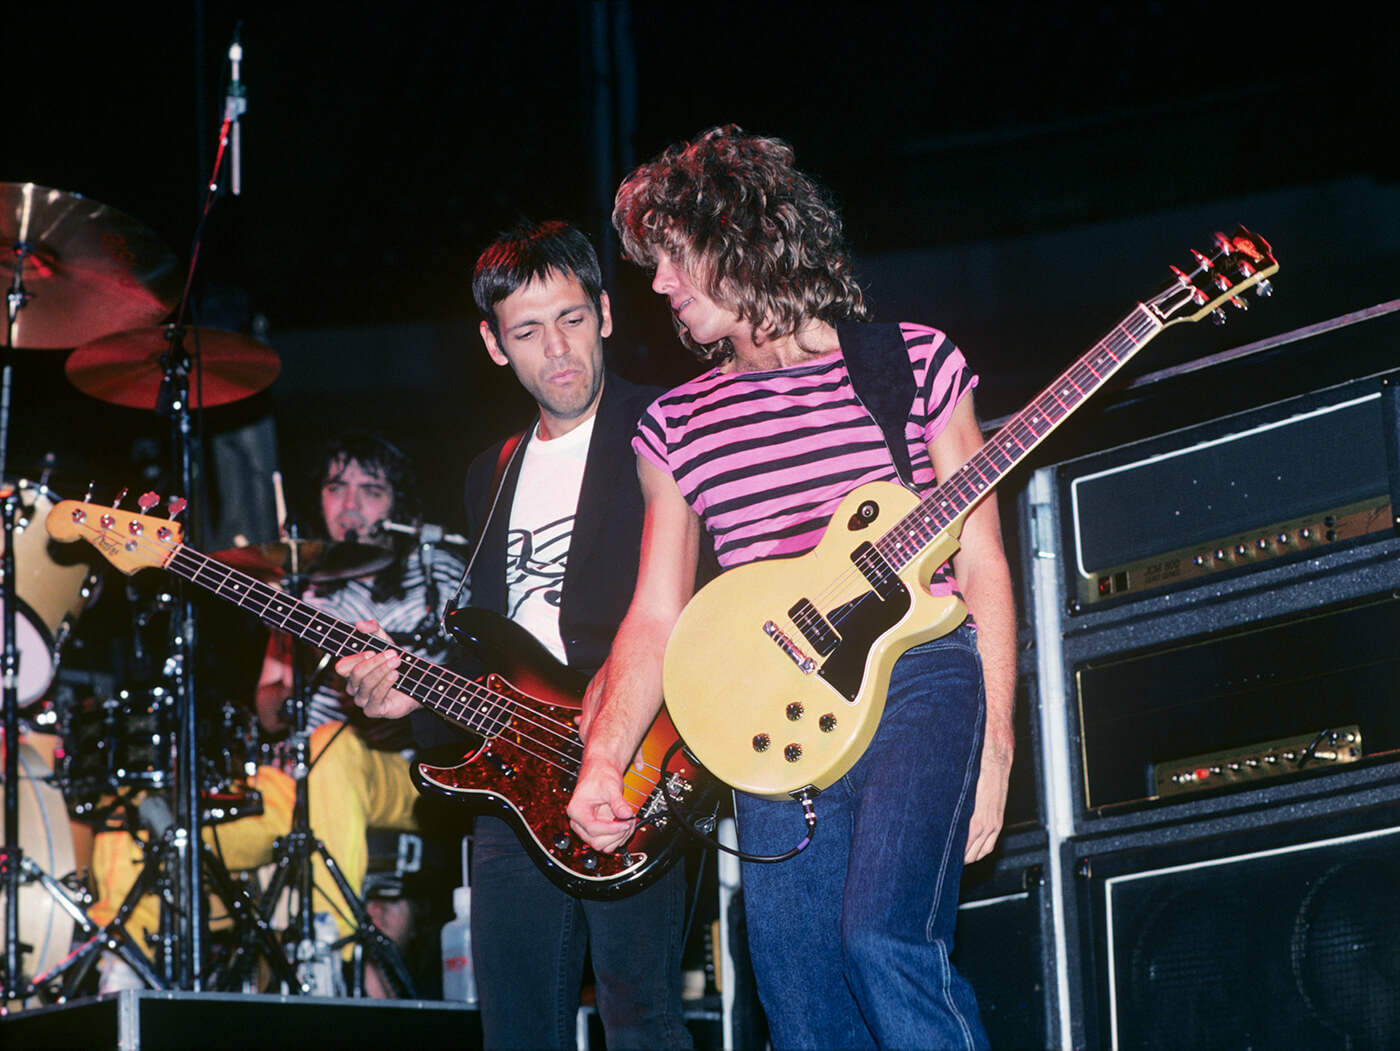 Greg Lubahn (pictured on the left) playing with the Billy Squier Band.